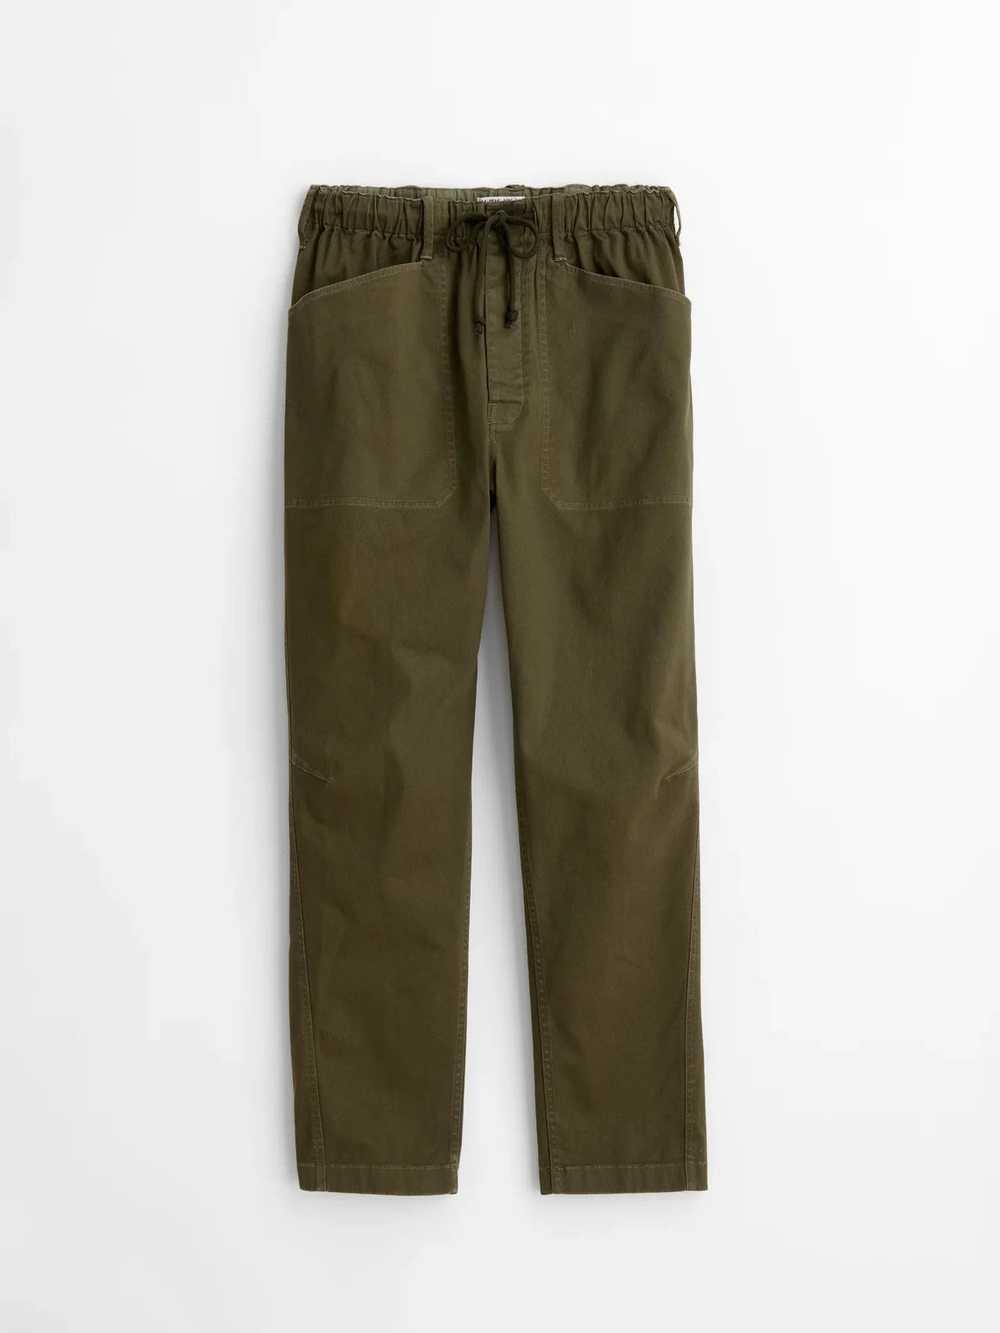 Alex Mill Olive Pull-On Button Fly Pant - image 4